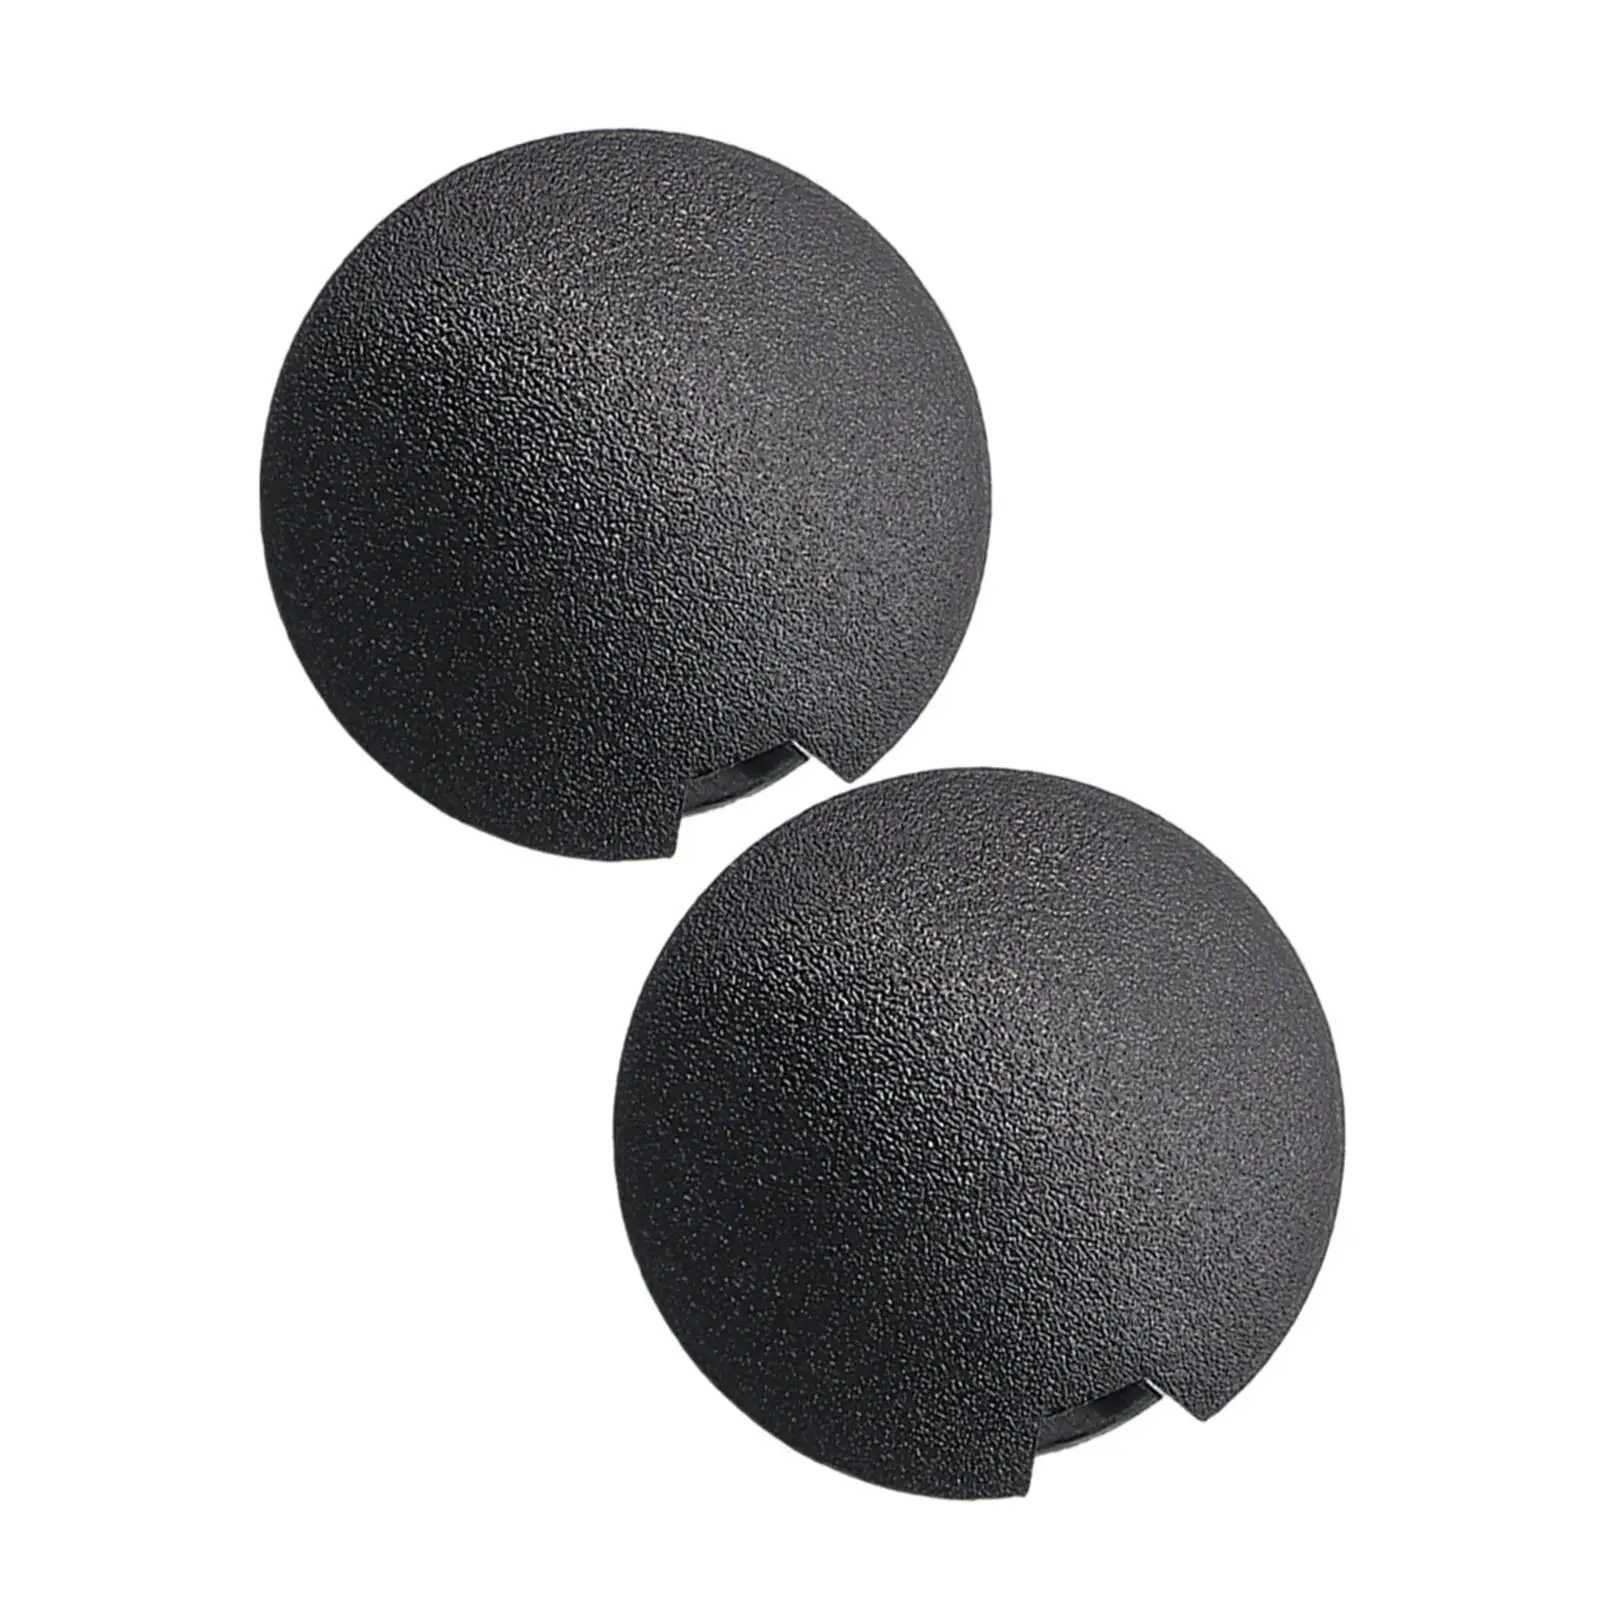 2x Professional Towing Eye Lid cap Replacement for Smart 451 Trailer